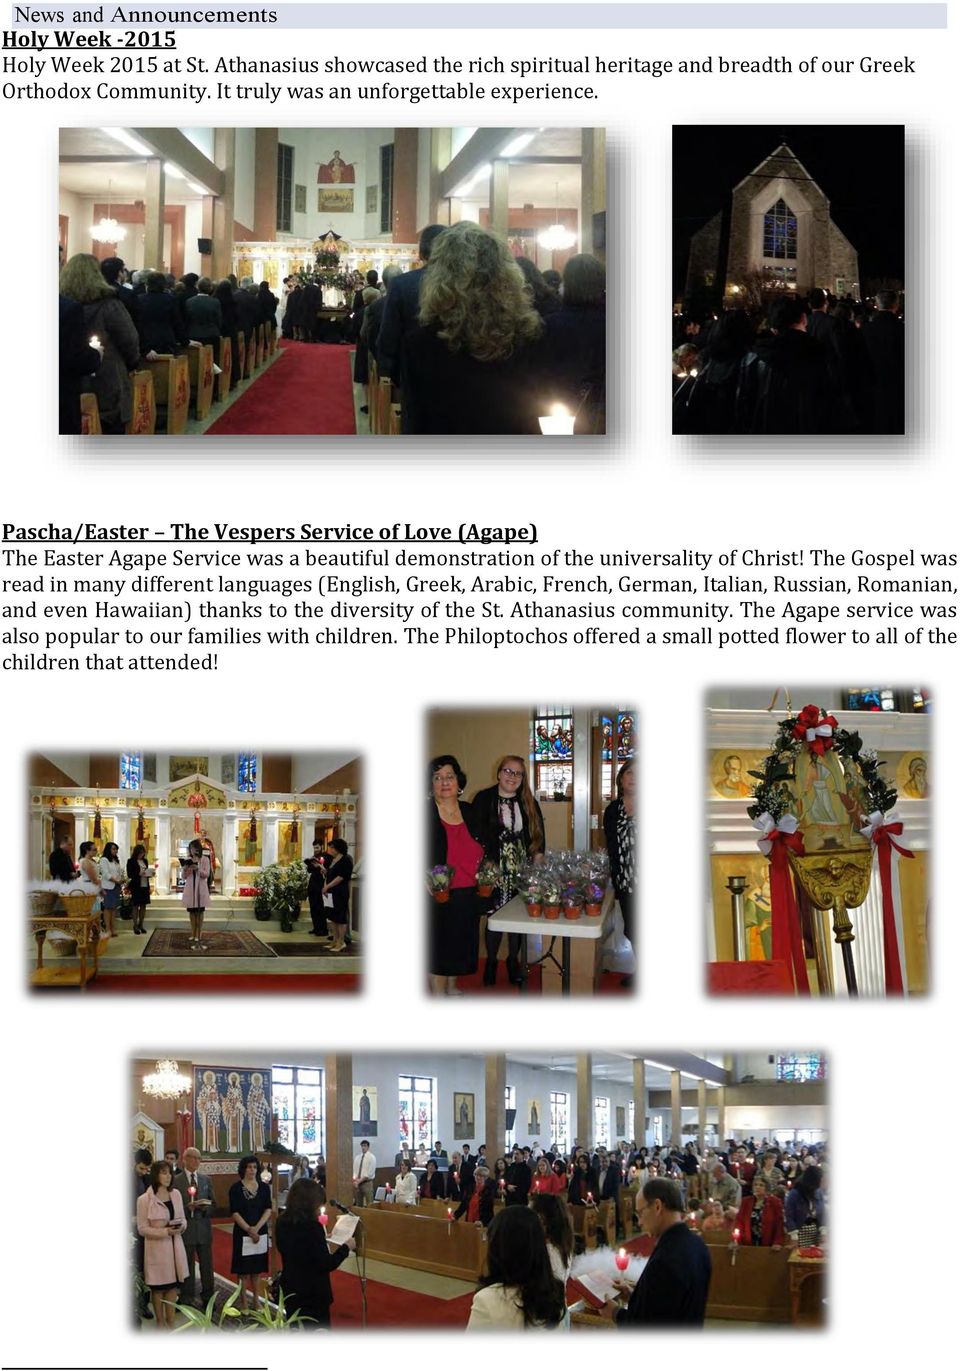 Pascha/Easter The Vespers Service of Love (Agape) The Easter Agape Service was a beautiful demonstration of the universality of Christ!